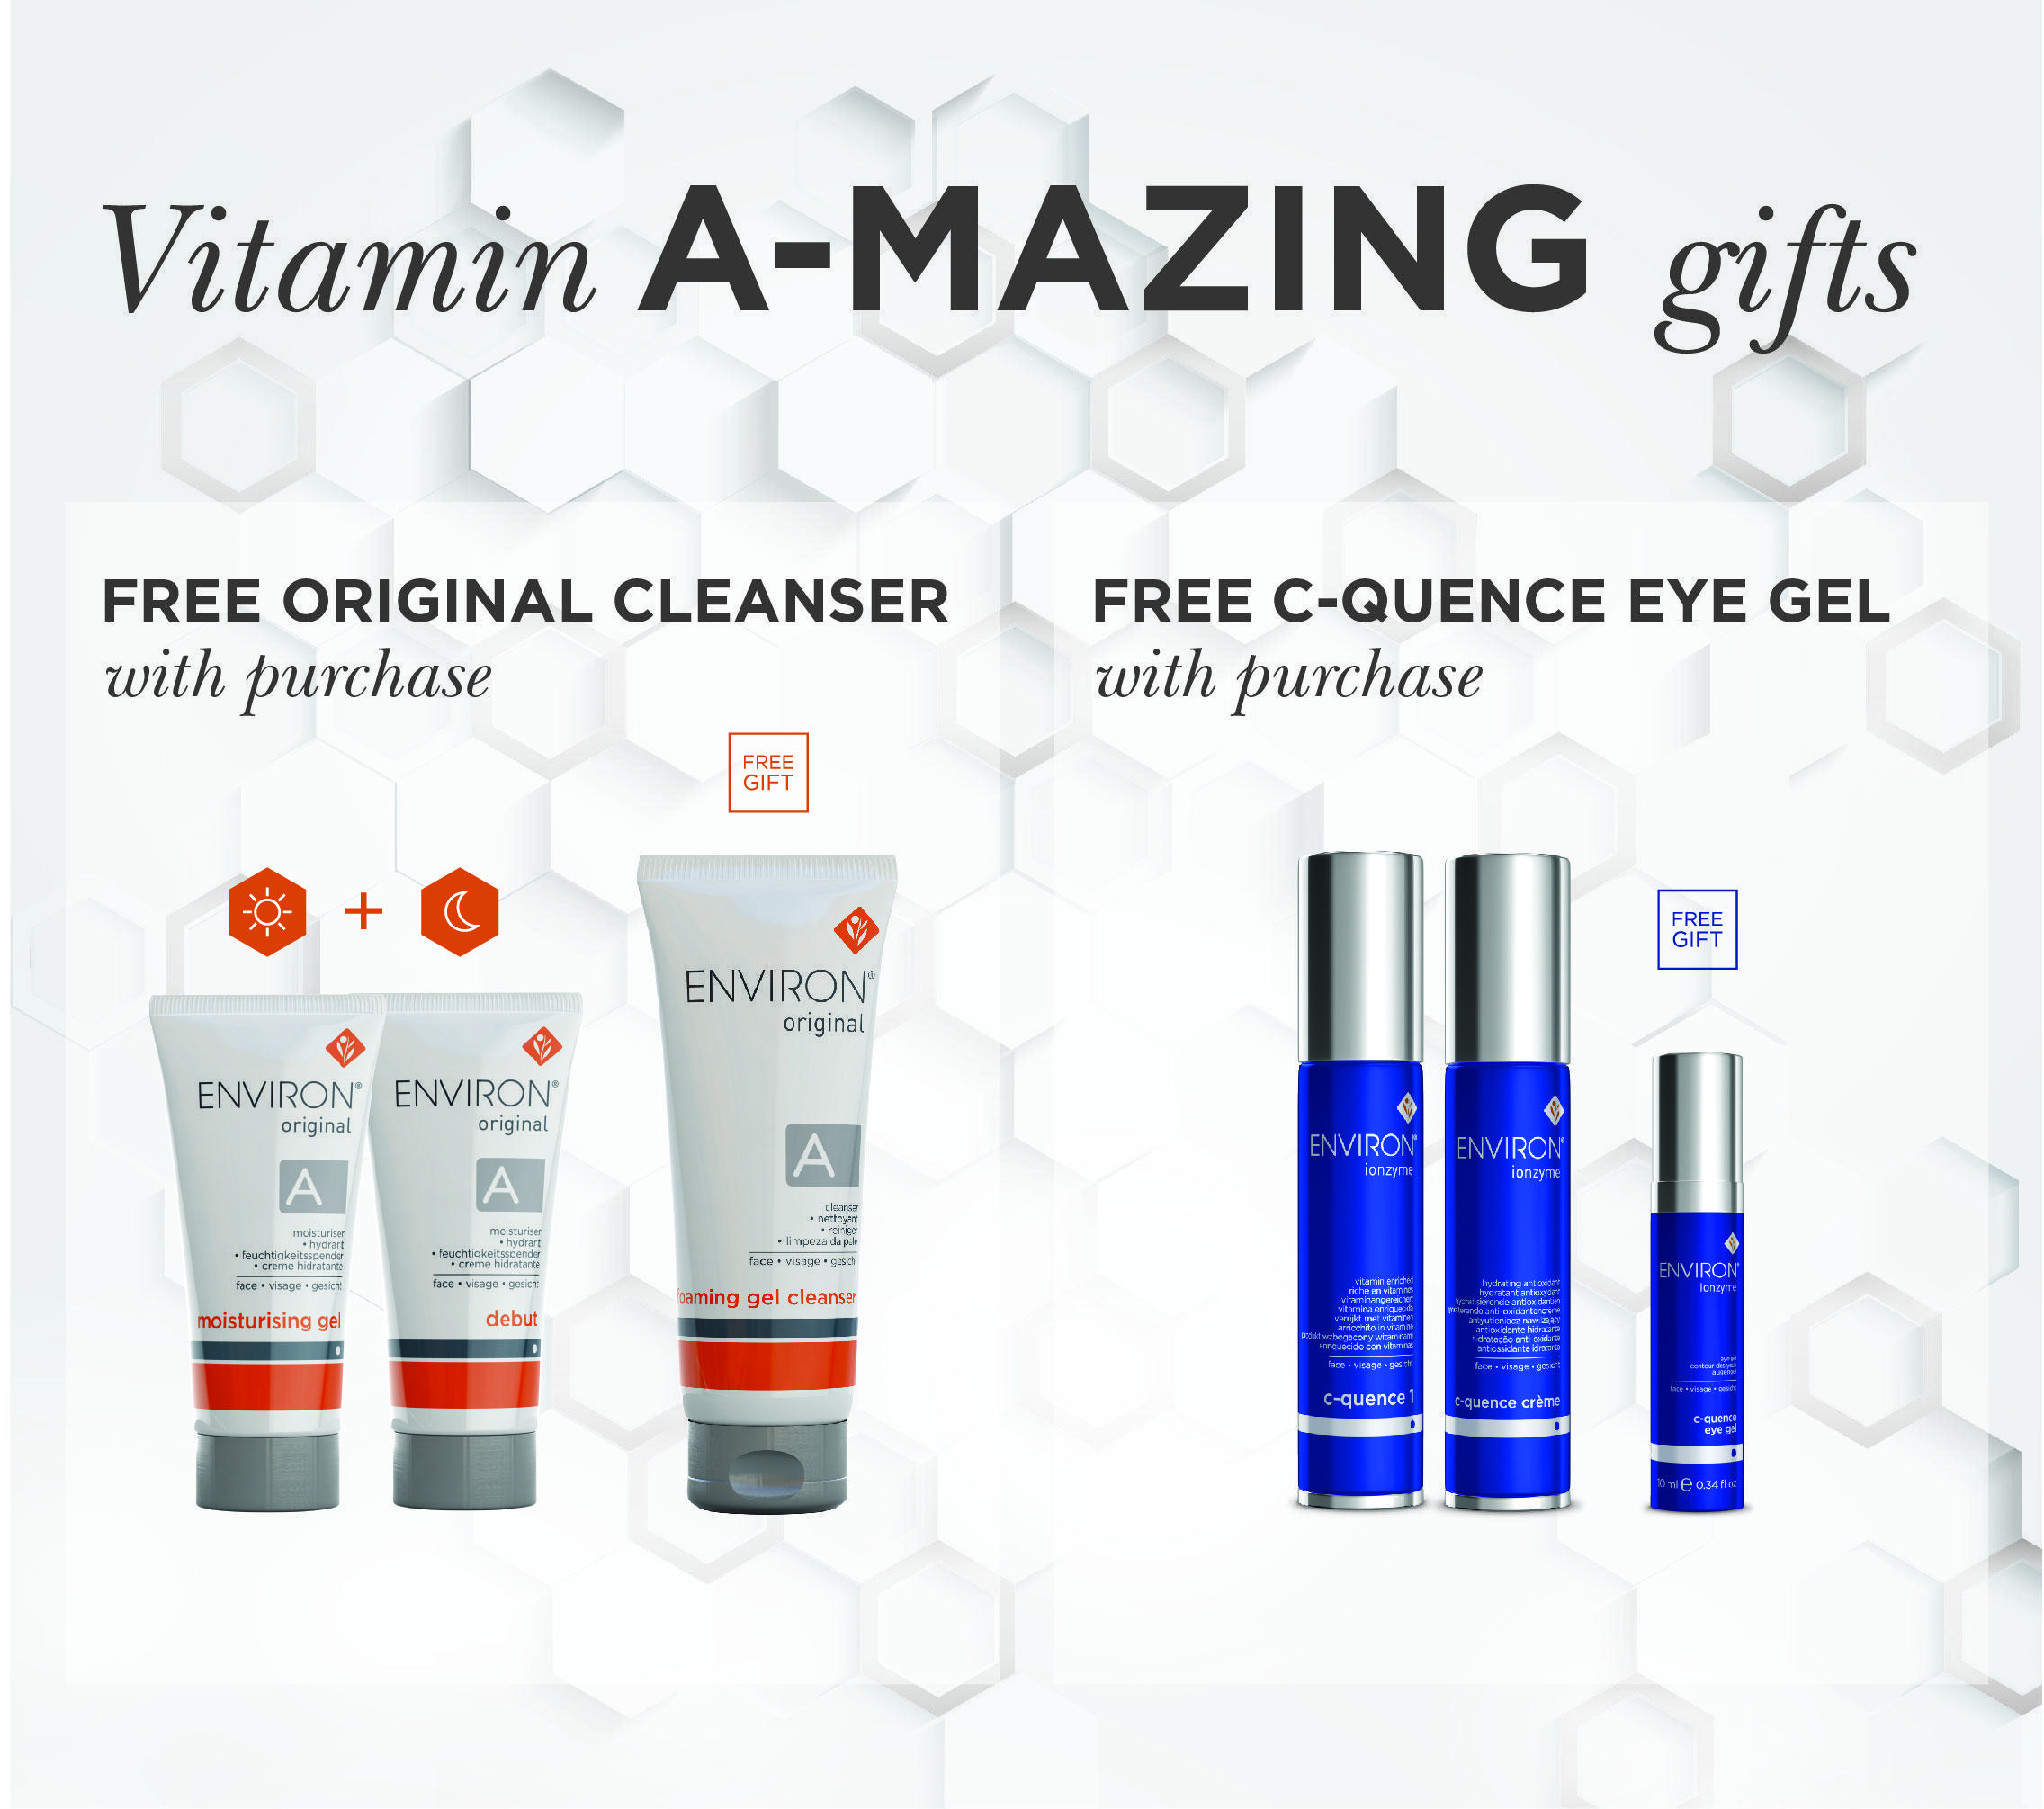 Vitamin A takes skin care products to the next level | Environ Skin Care